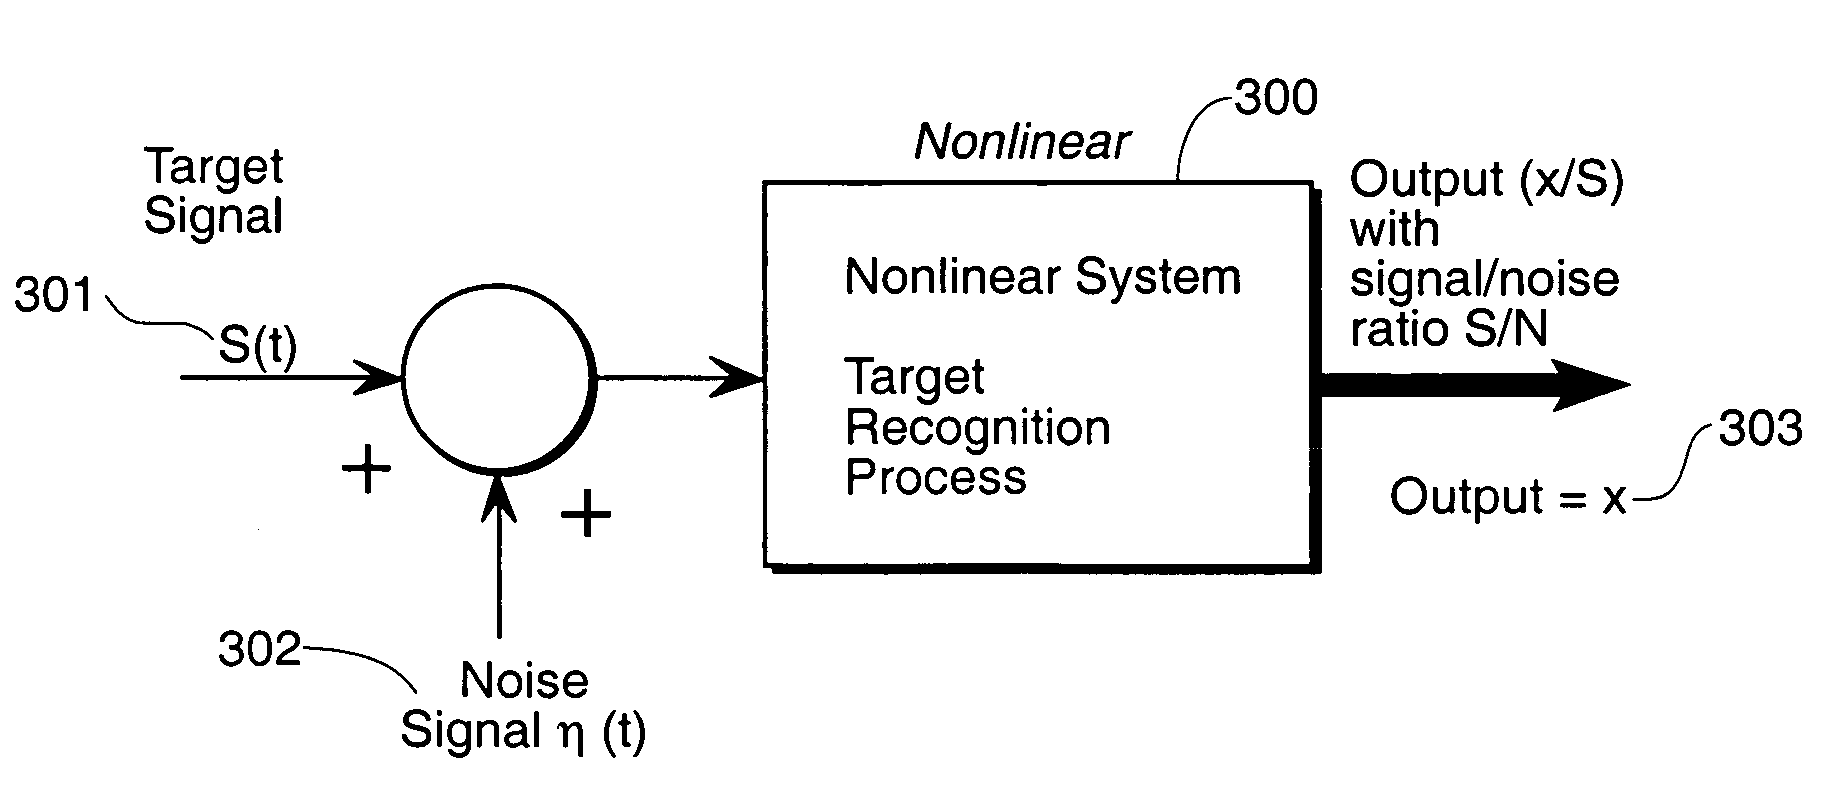 Nonlinear target recognition